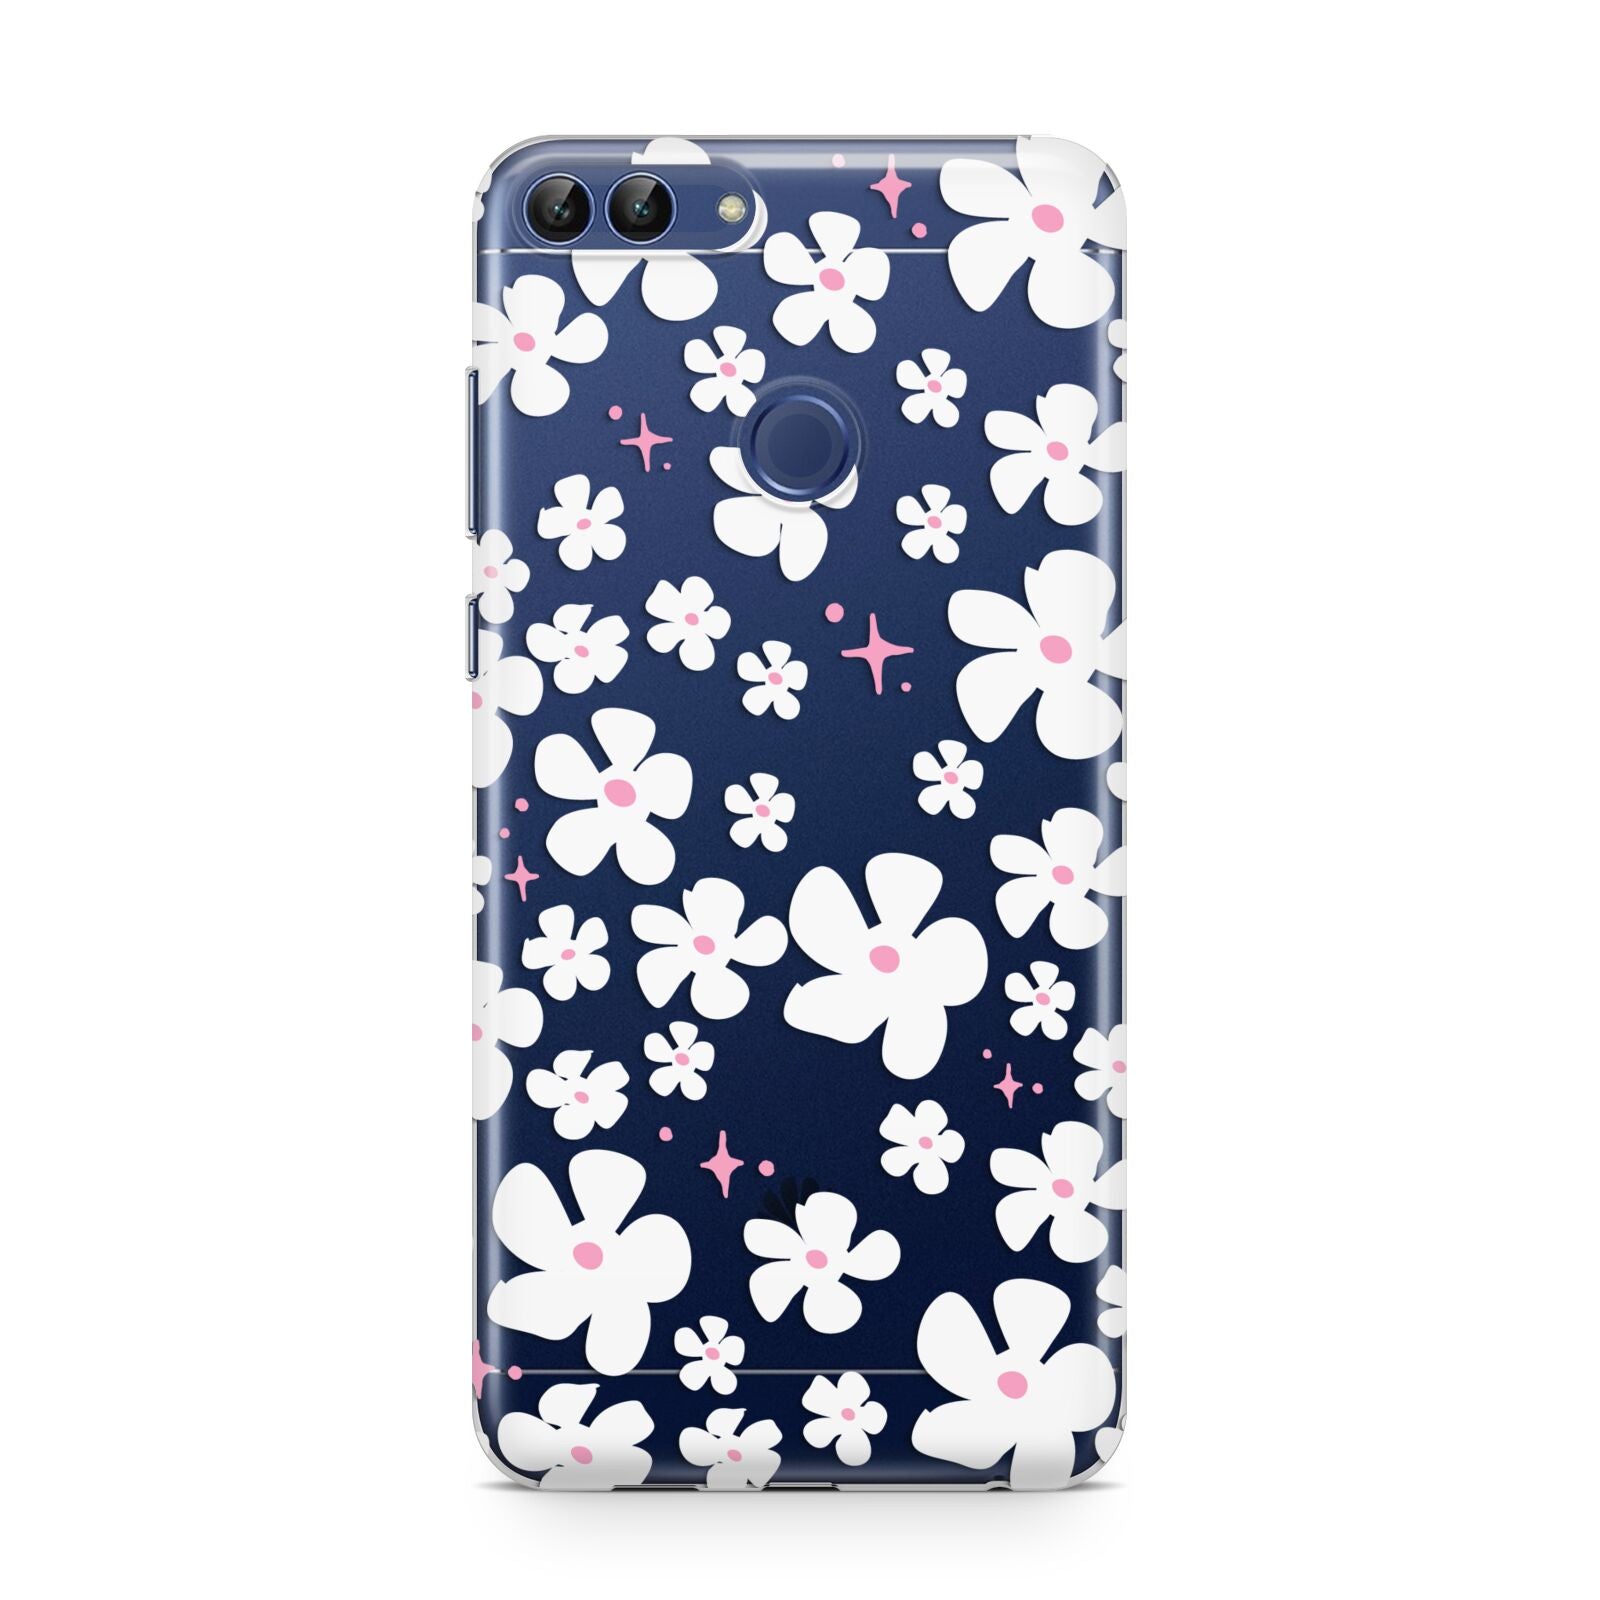 Abstract Daisy Huawei P Smart Case